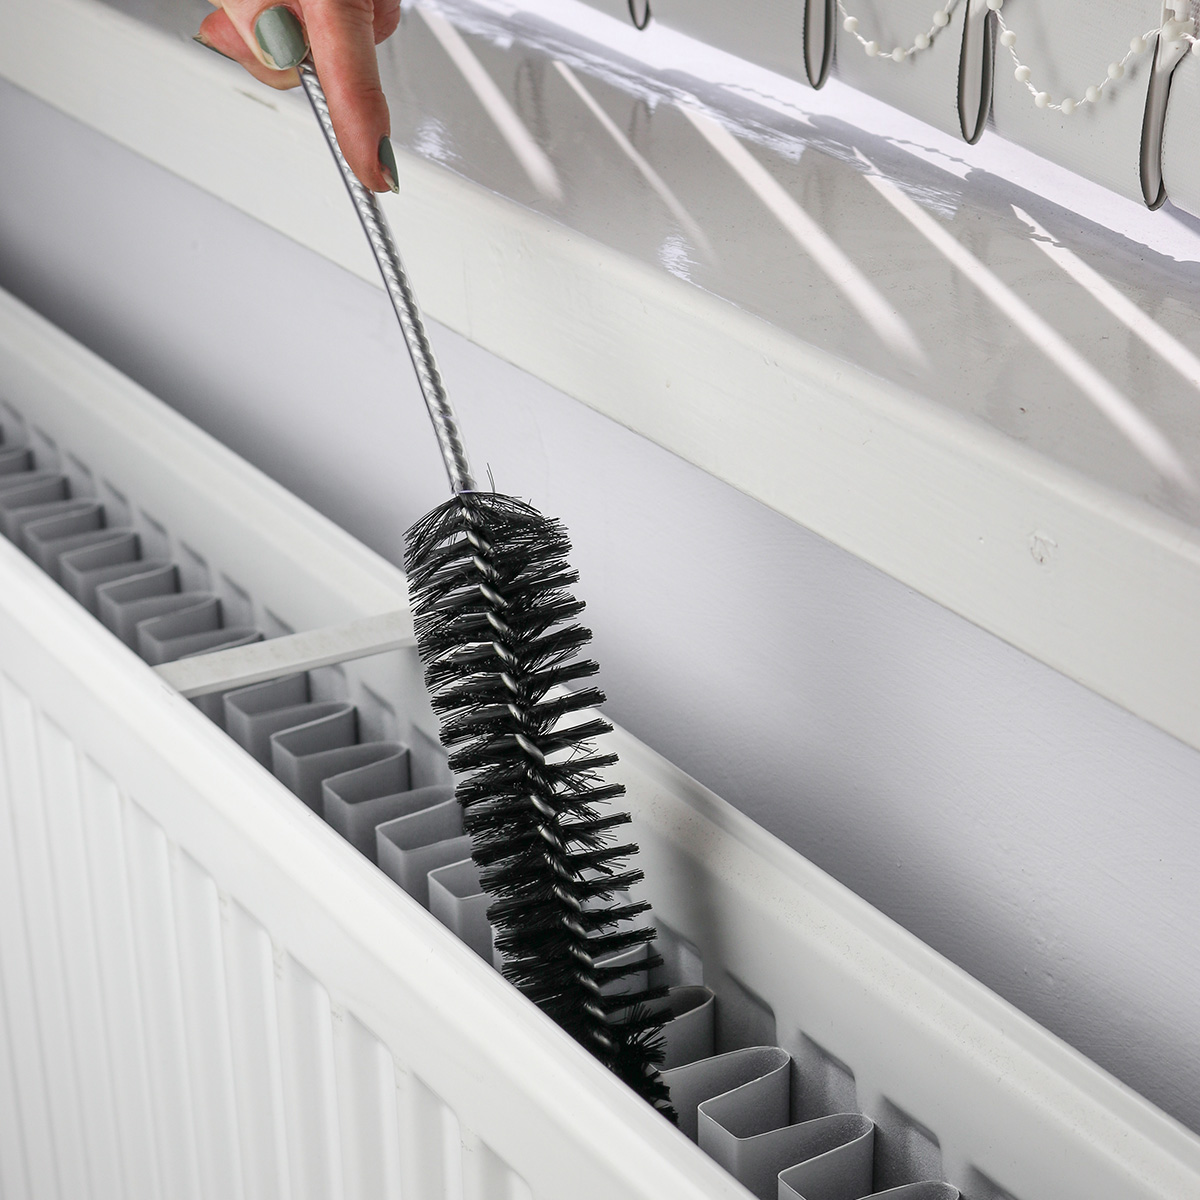 How to Clean Your Radiators and Towel Rails